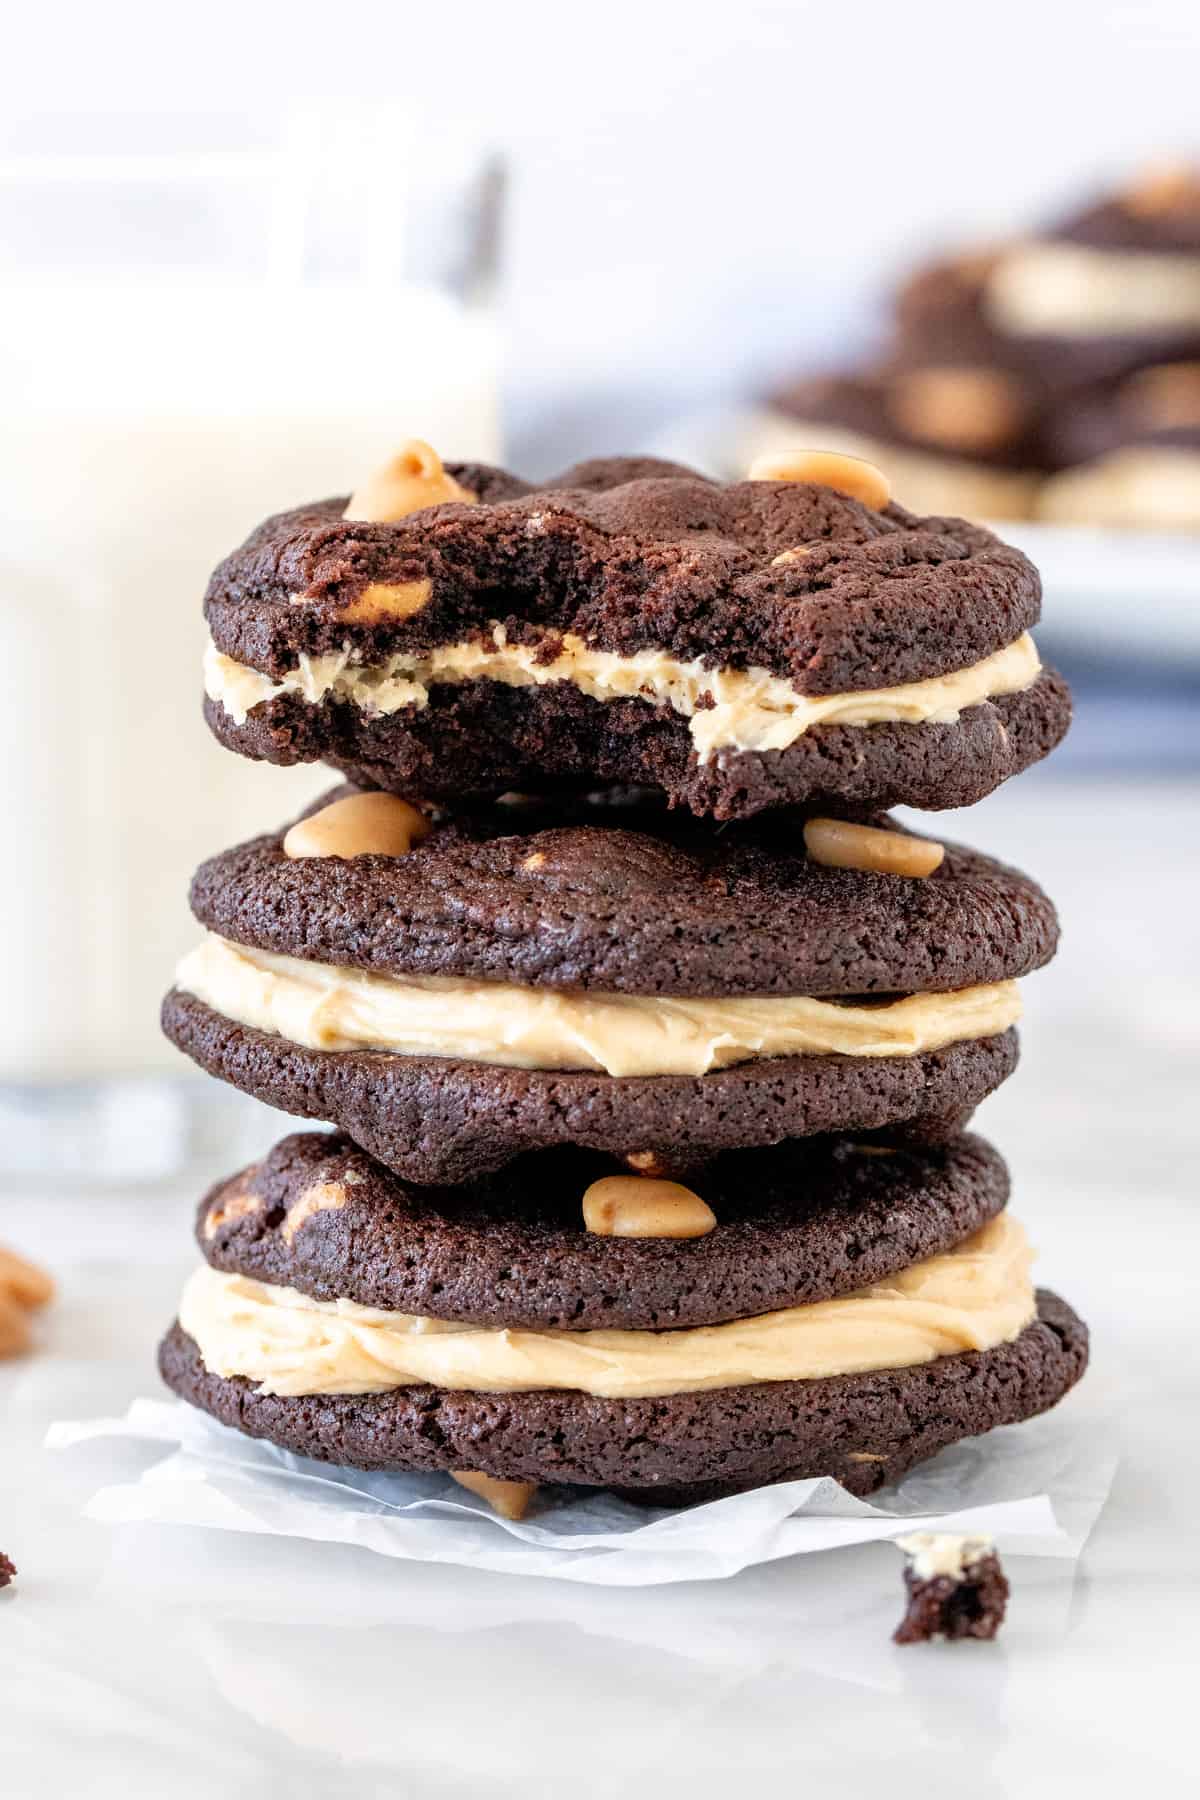 Stack of 3 chocolate peanut butter sandwich cookies with a glass of milk